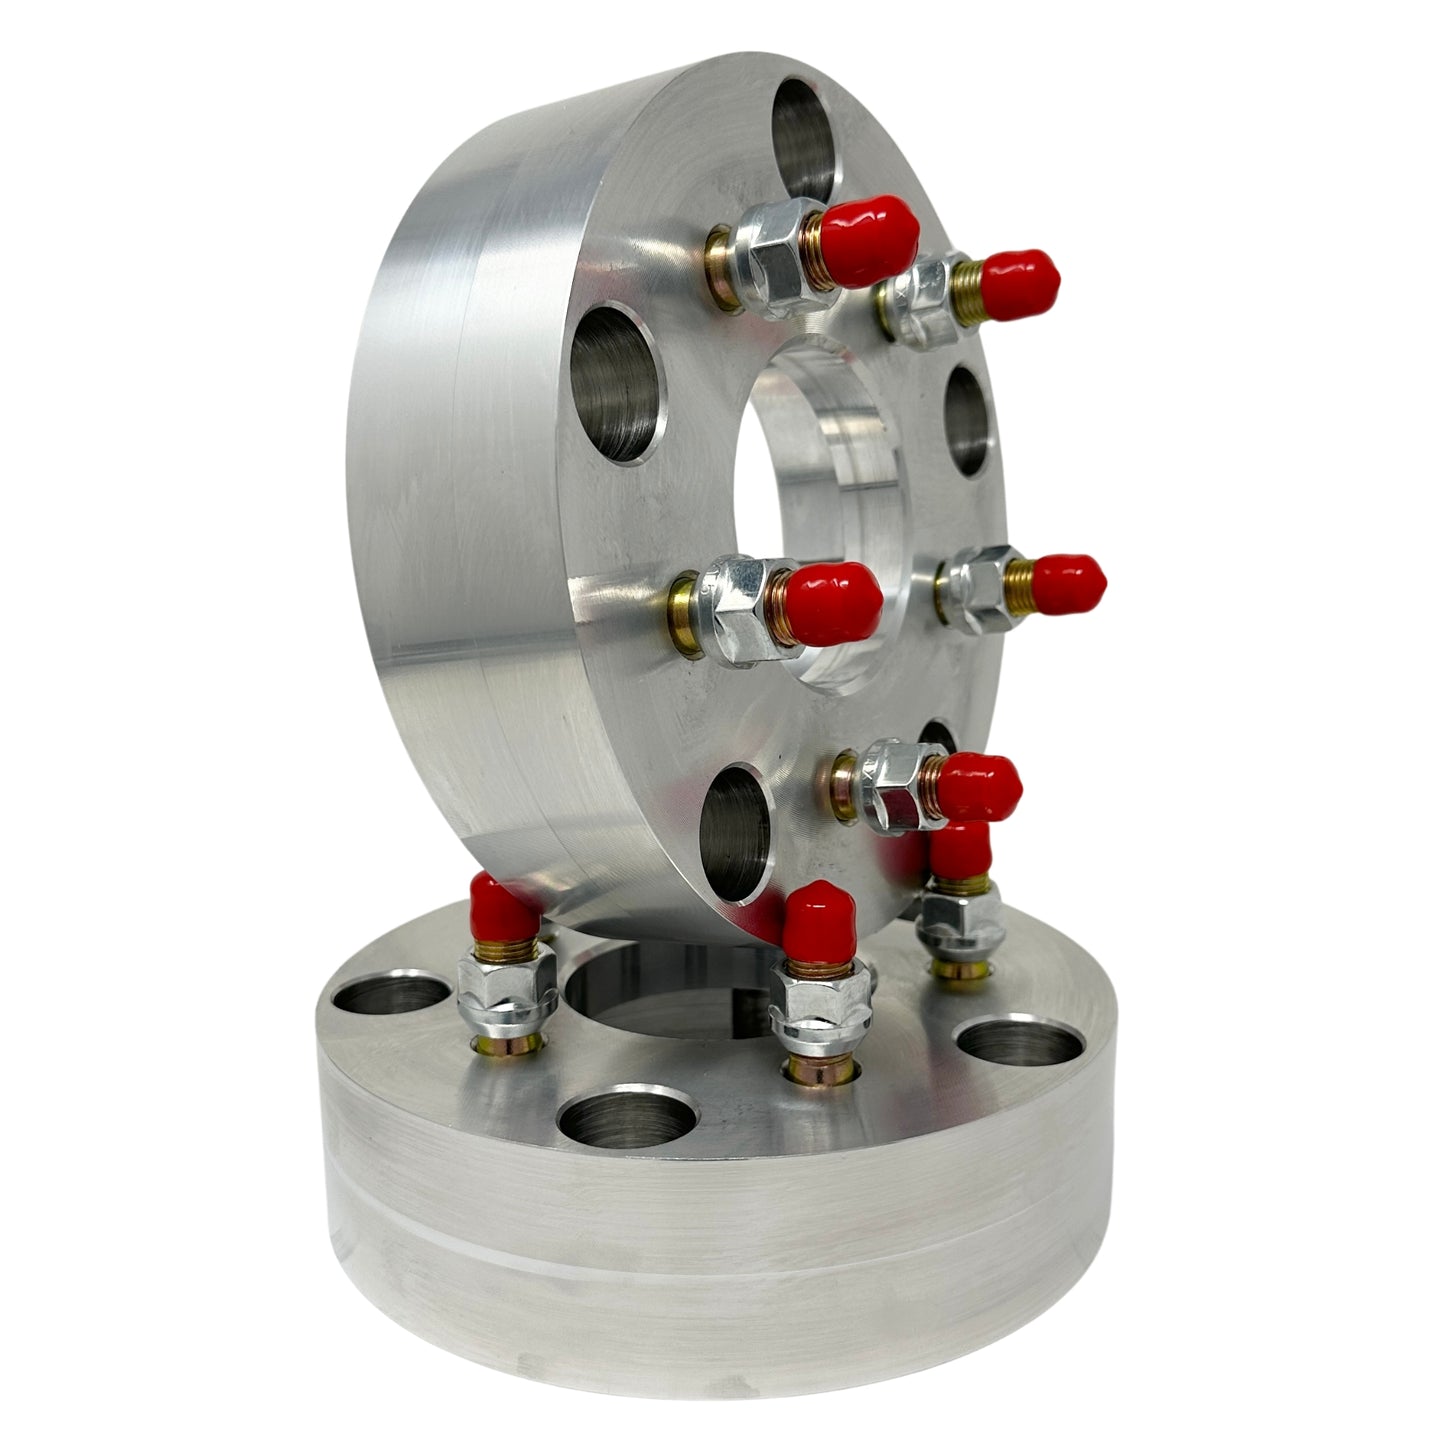 5x205 to 5x112 Wheel Spacer/Adapter - Thickness: 1.25"- 4.0"